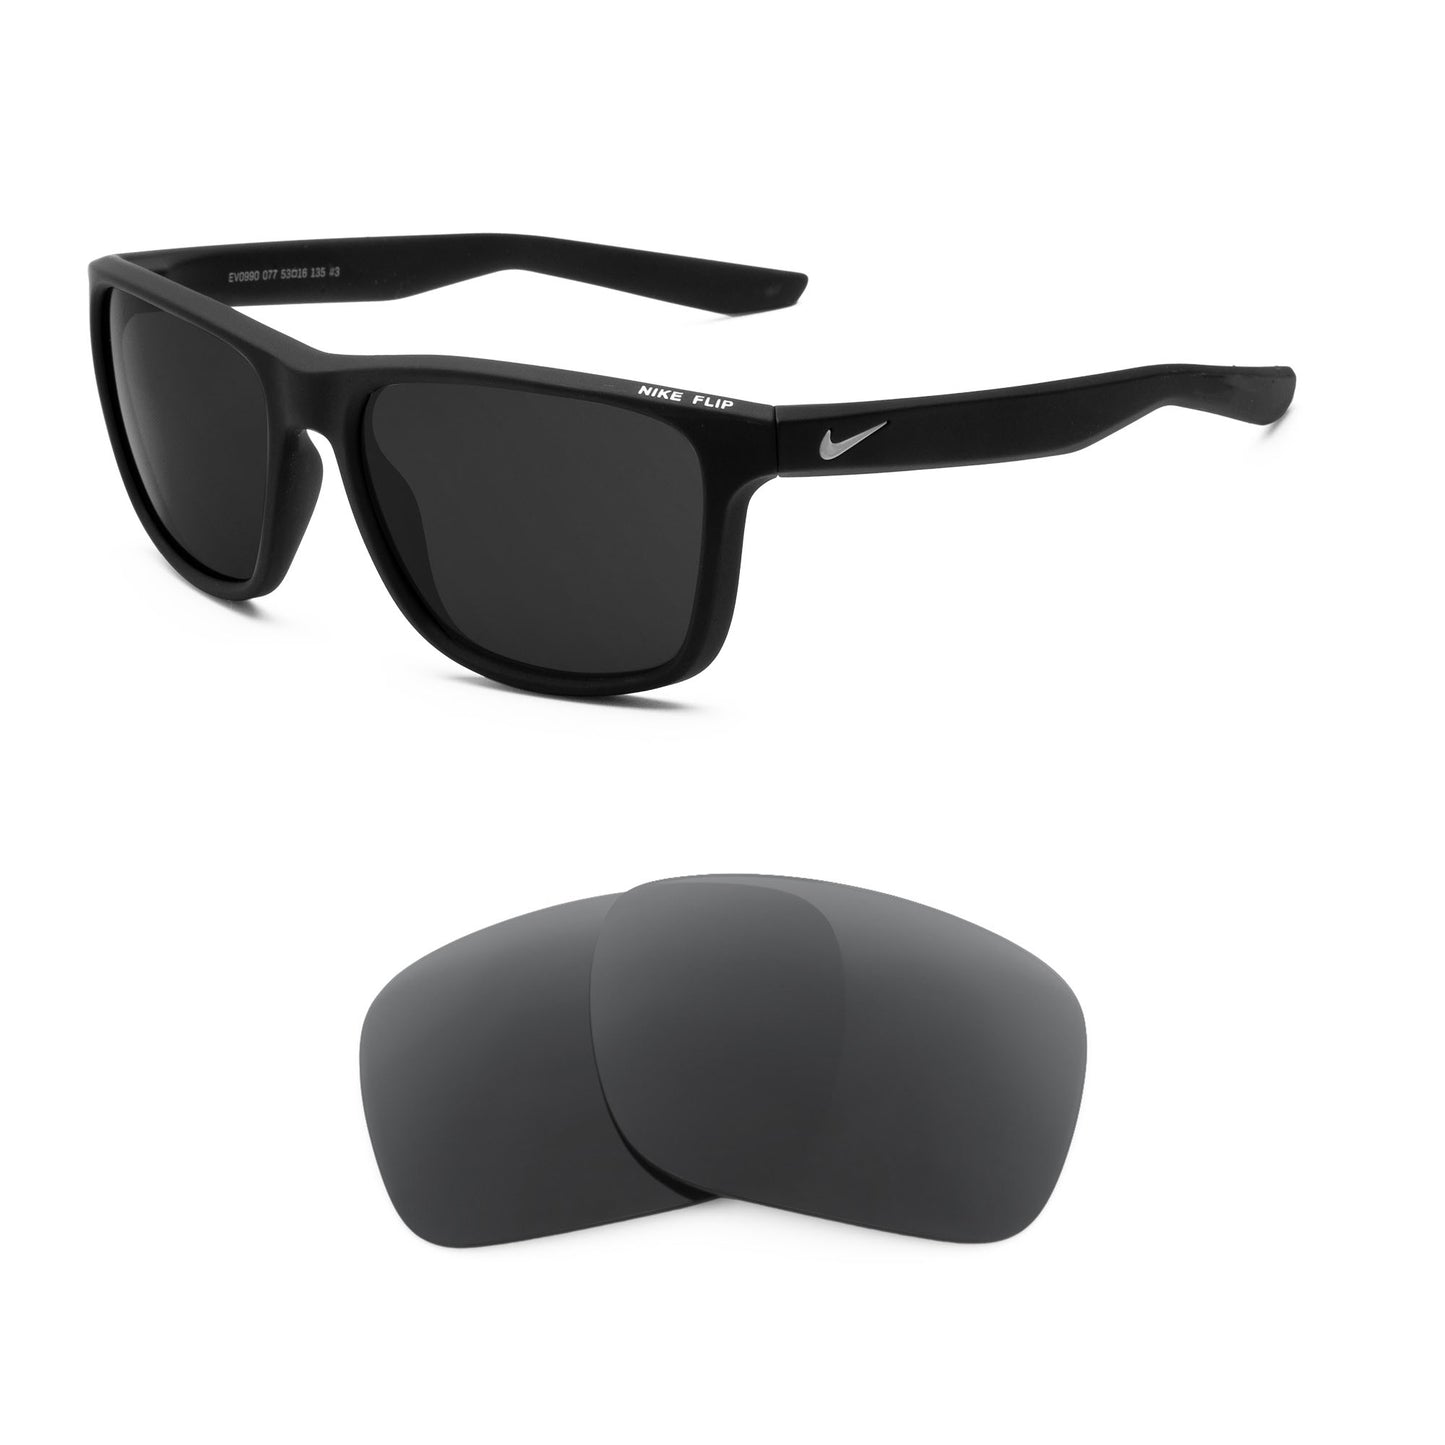 Nike Flip sunglasses with replacement lenses